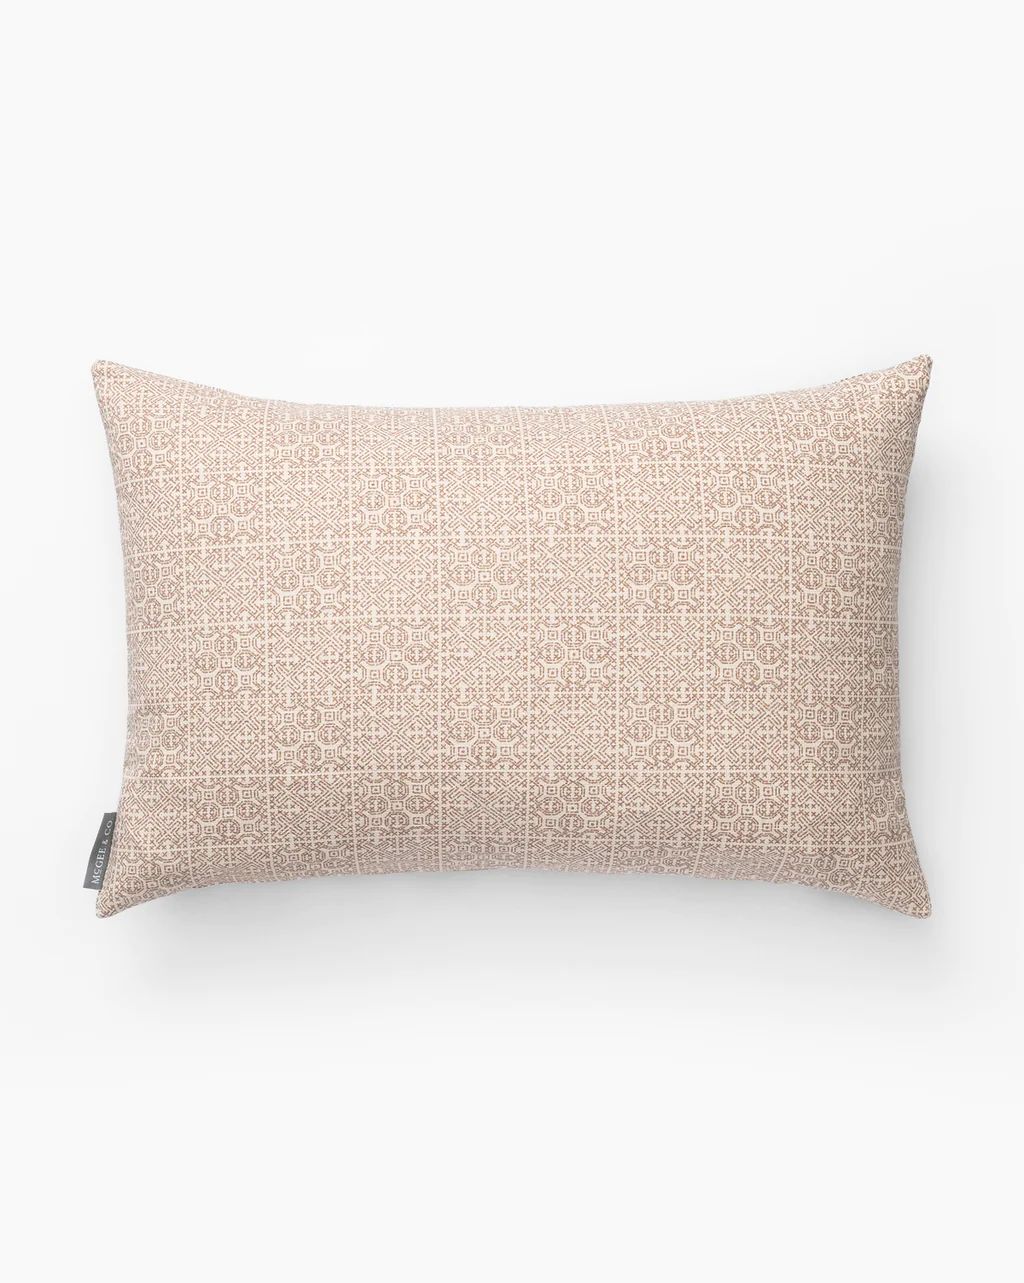 Vintage Brown & White Tribal Pattern Pillow Cover | McGee & Co.